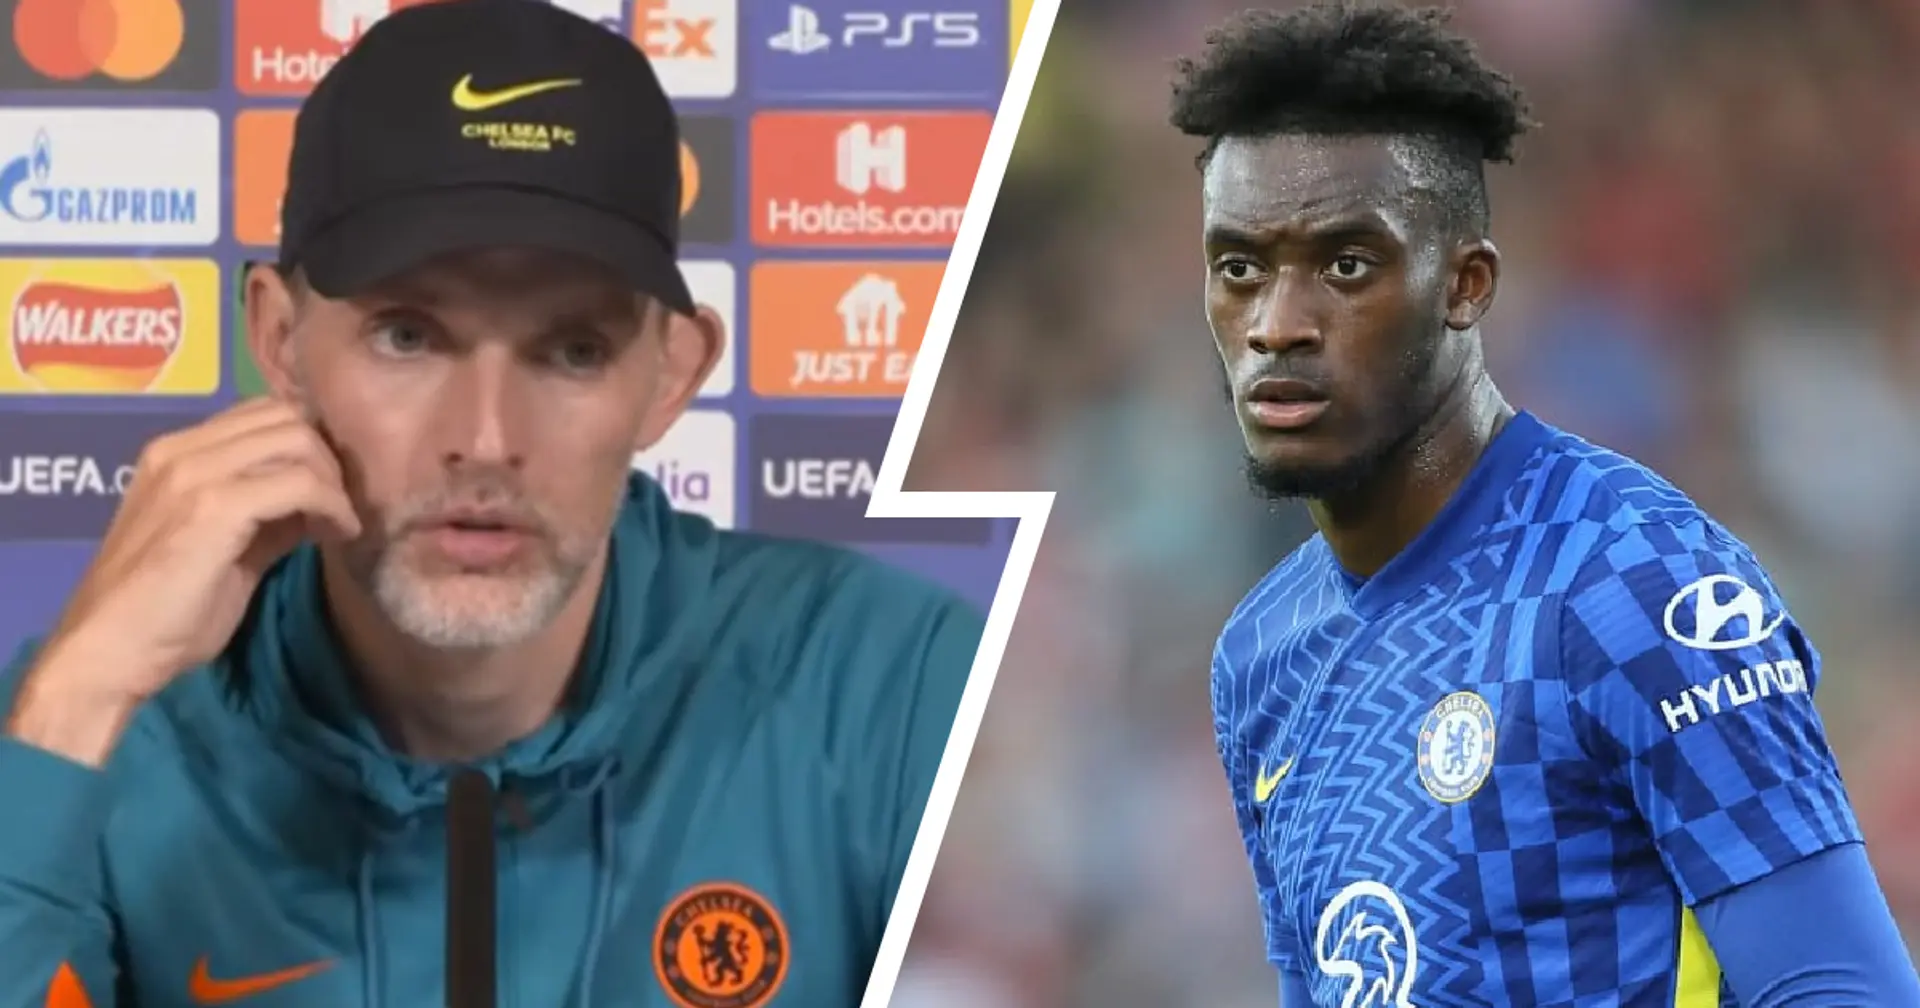 Yet another injury scare: Tuchel reveals why Hudson-Odoi was taken off in Chesterfield win